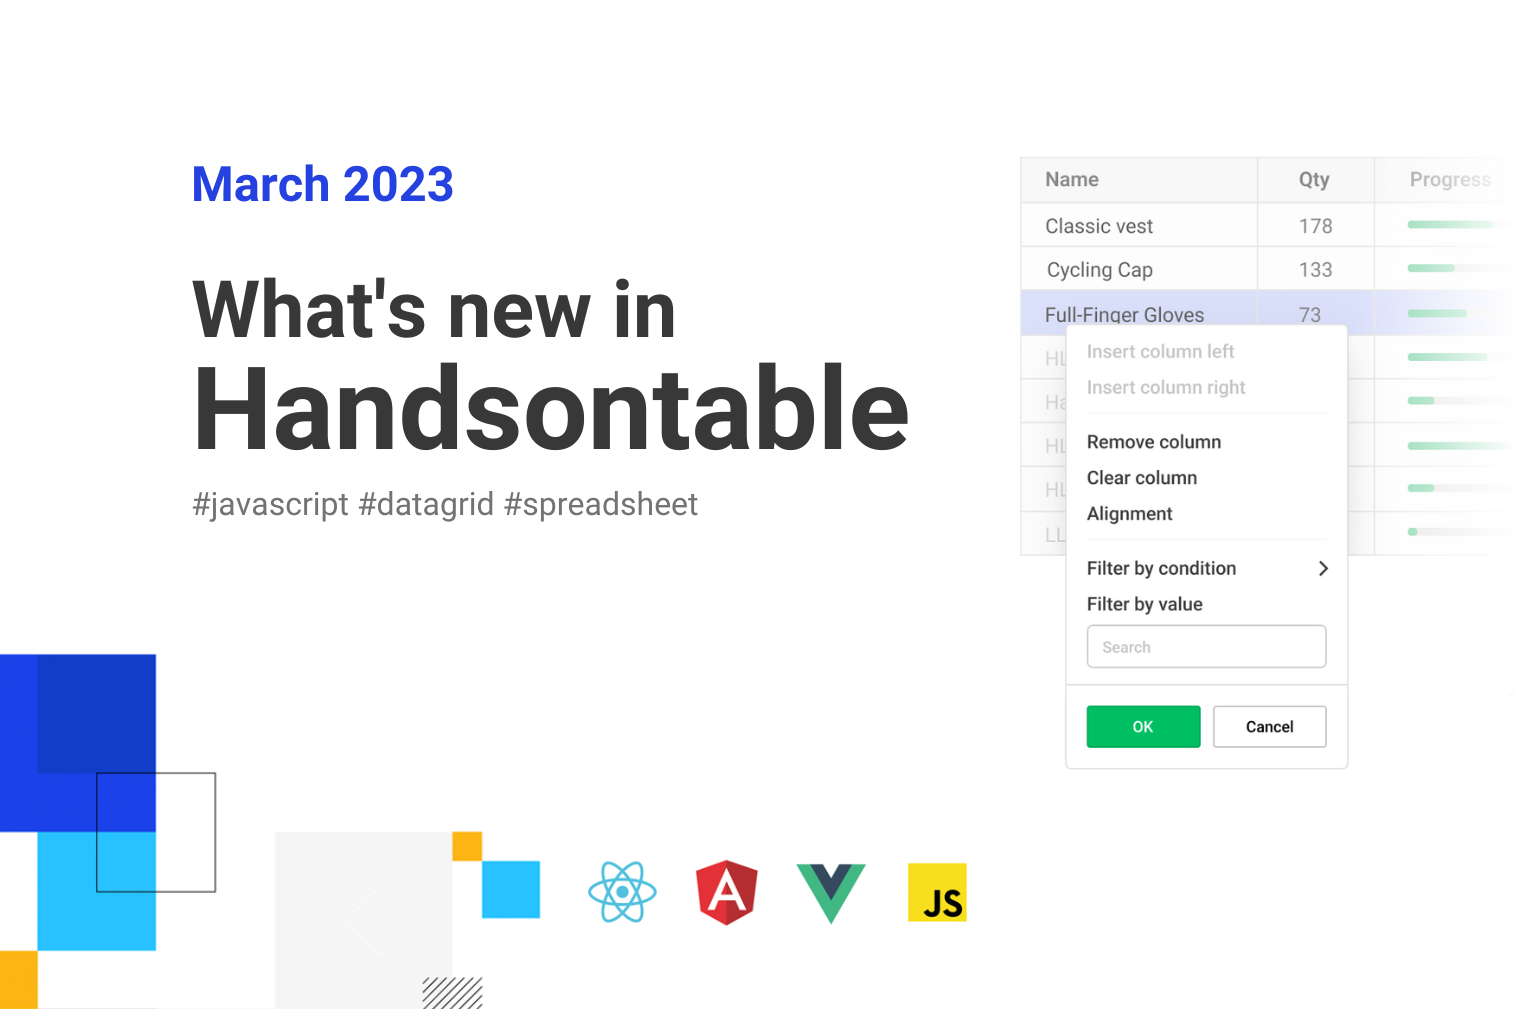 Illustration for a blog post - What's new in Handsontable: March 2023